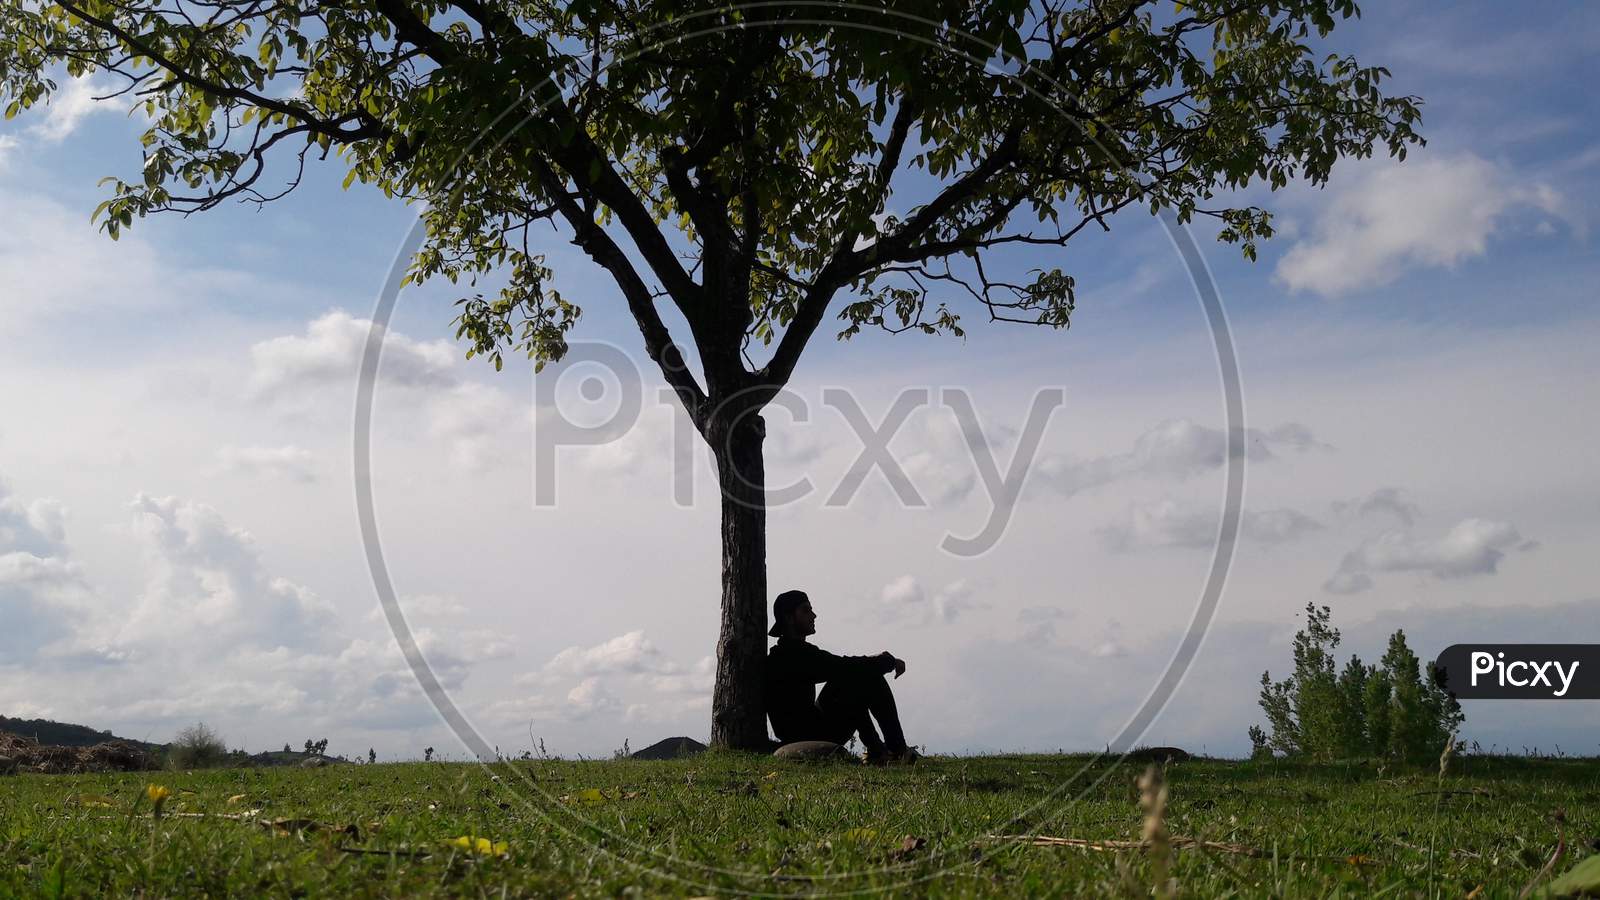 A Boy under the walnut tree, alone and lost in memories.